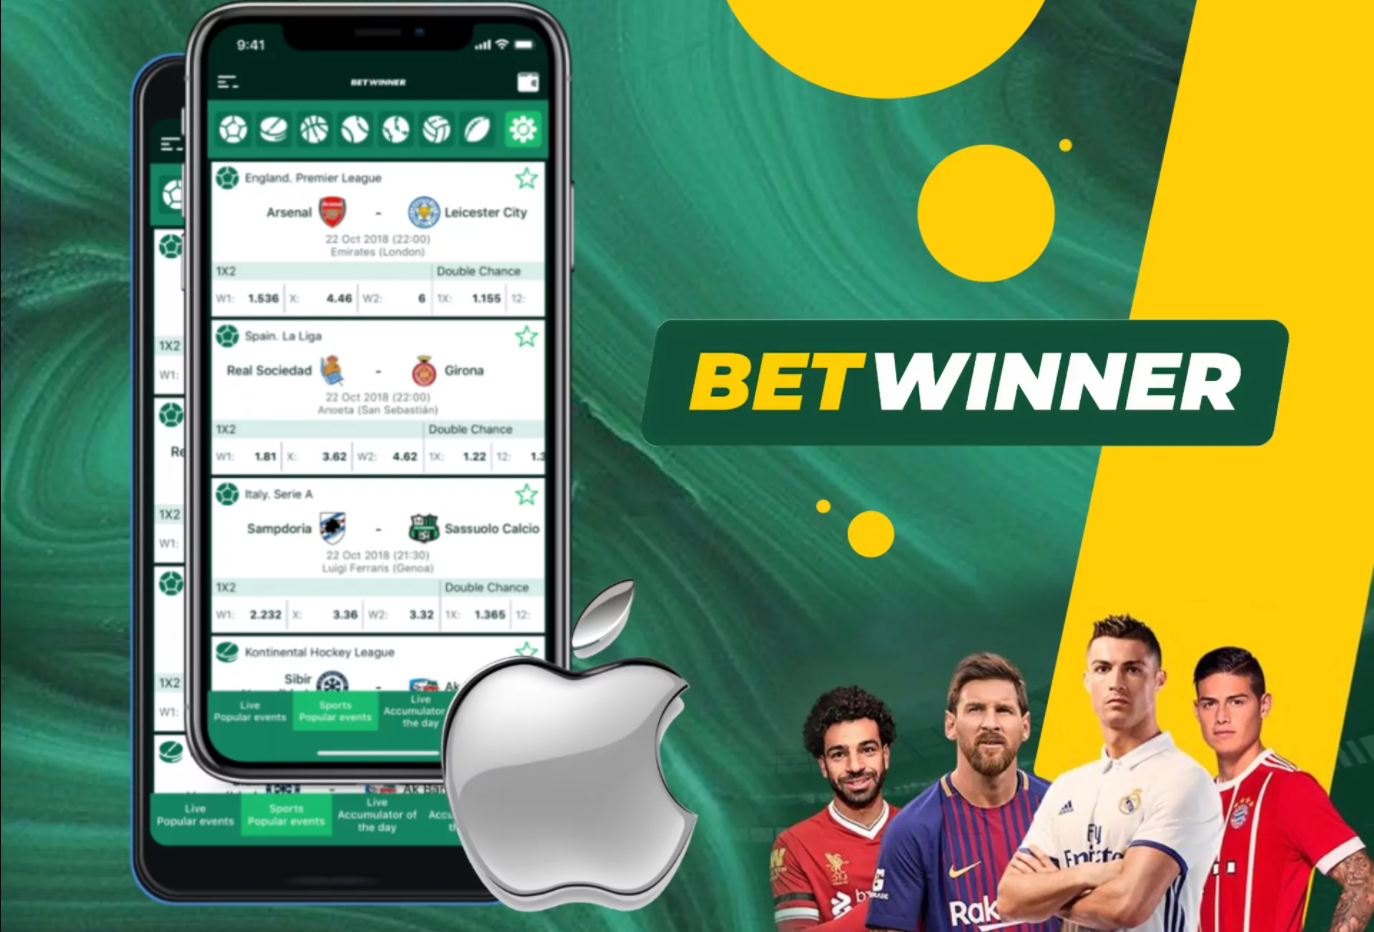 Betwinner apk functionality and iOS versions in India